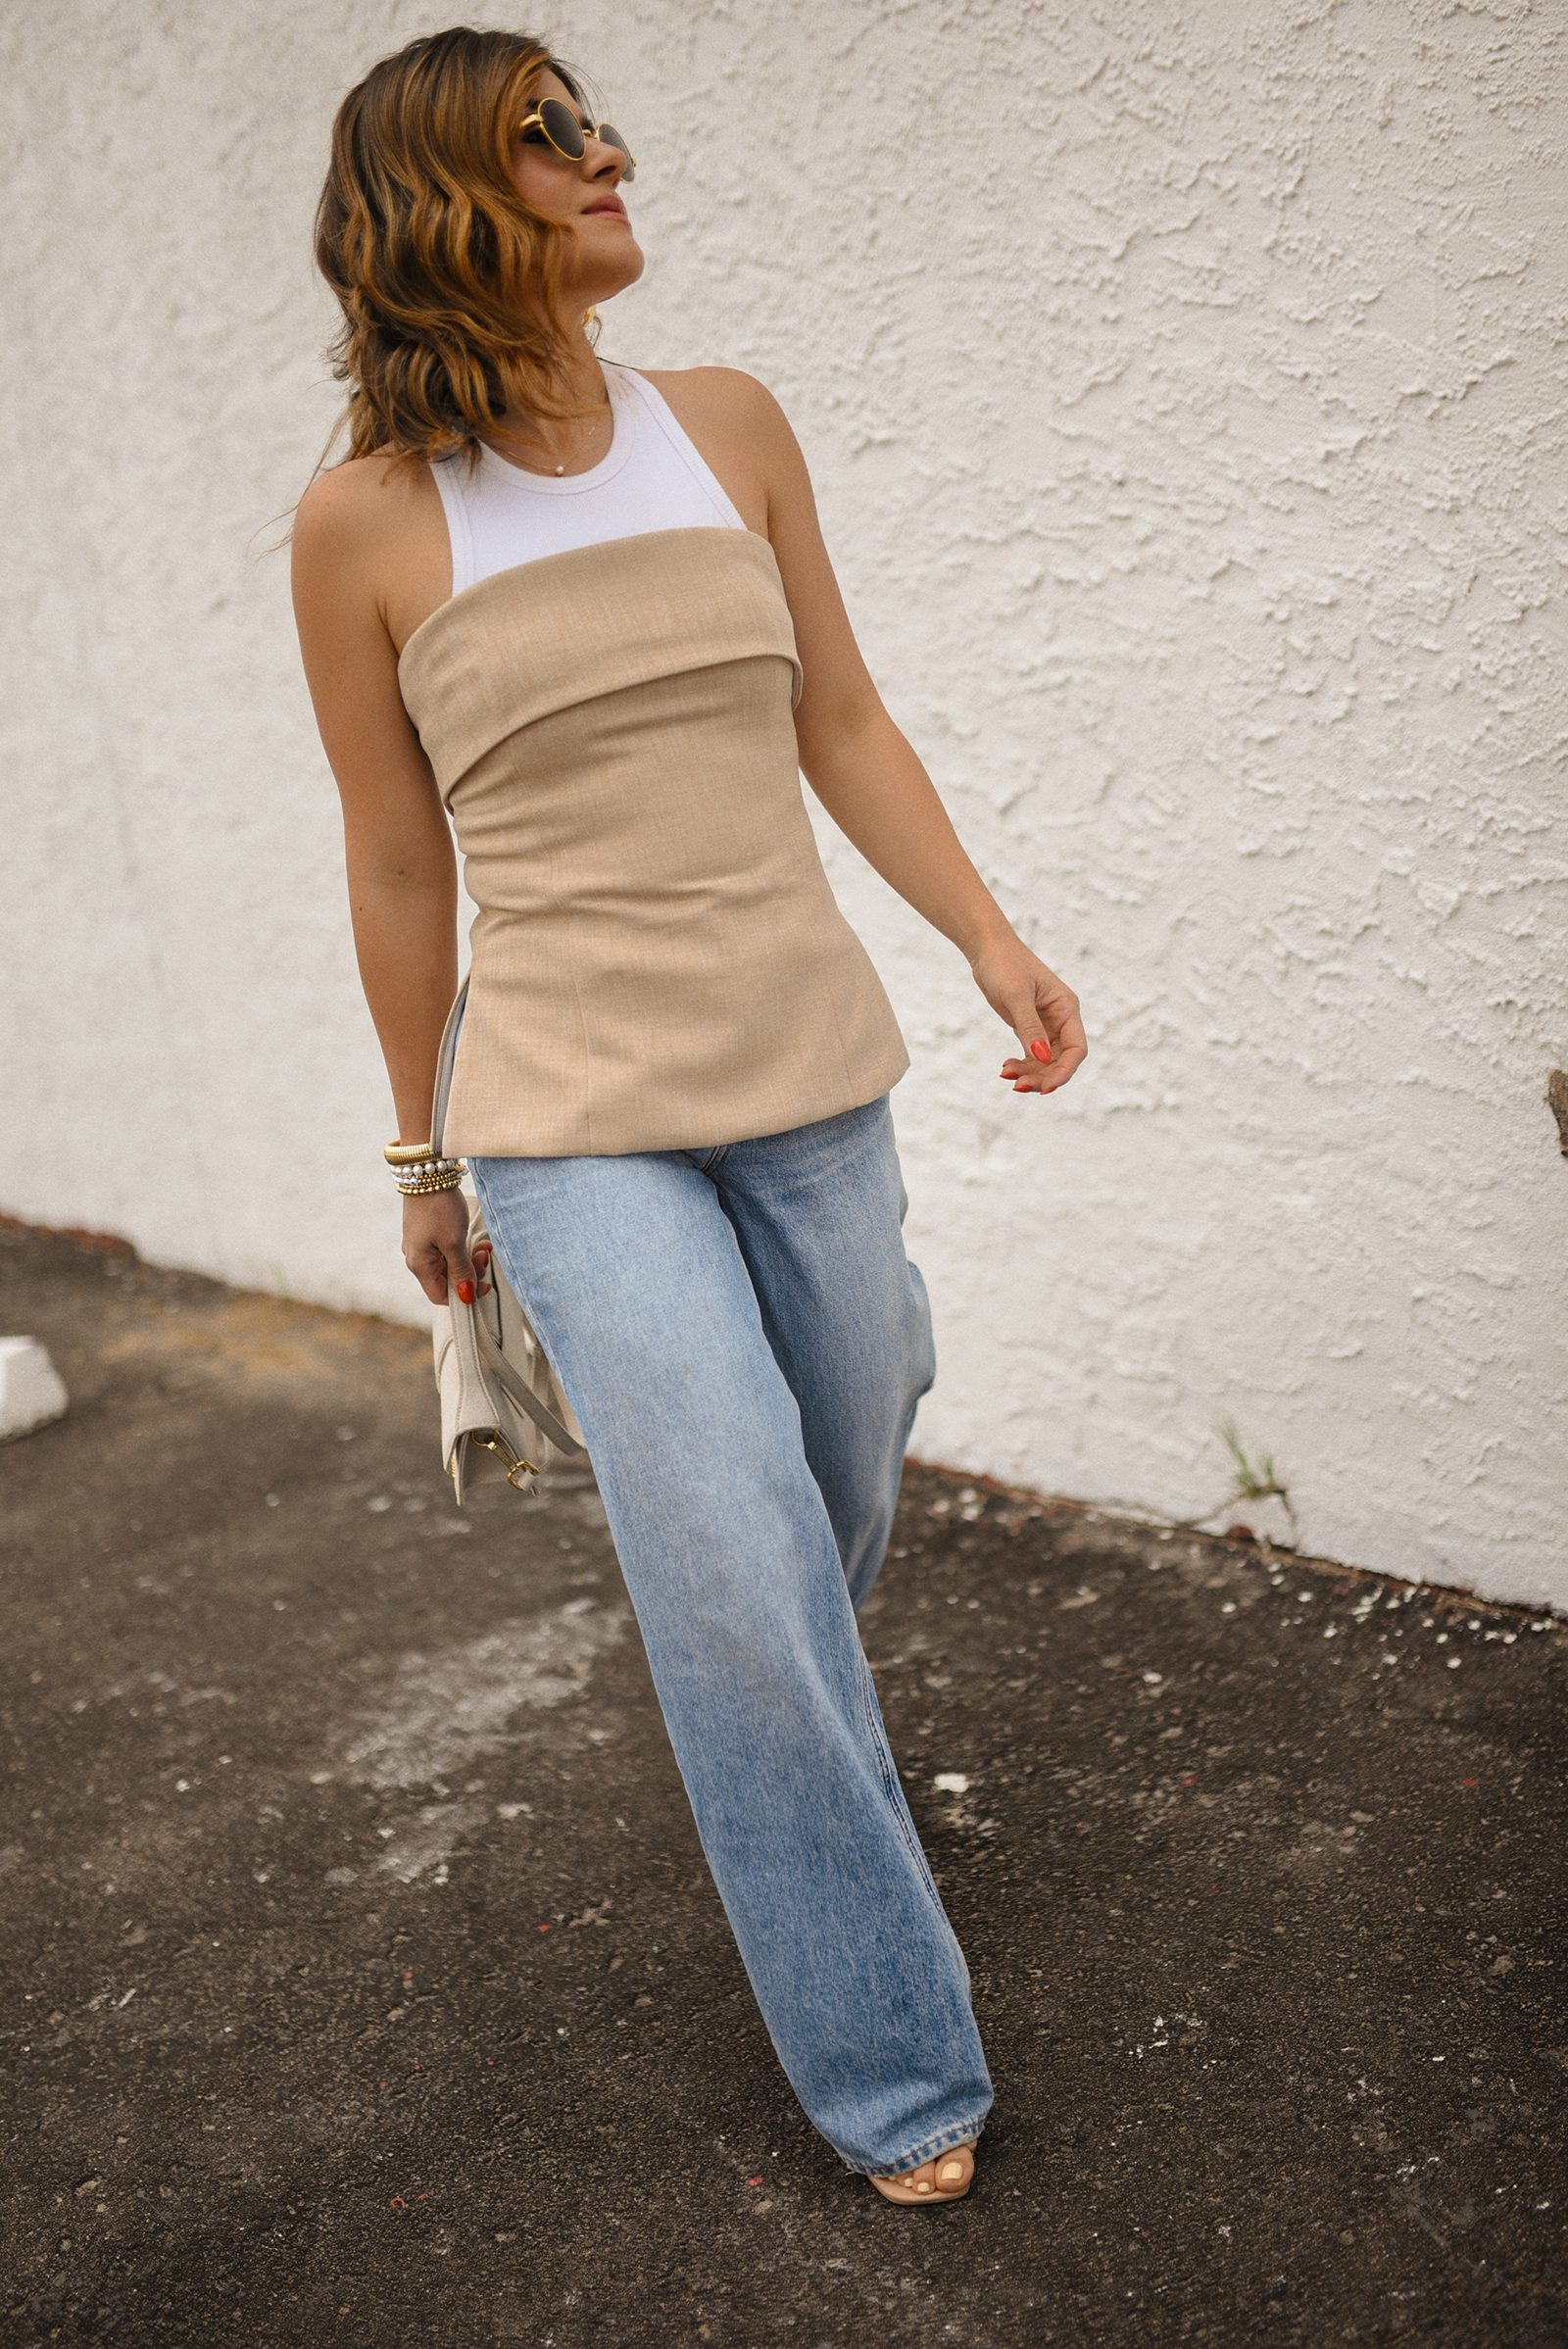 Carolina Hellal of Chic Talk wearing a Aritzia tube top and tank top, a wide leg jeans via Madewell and a Jacquemus hand bag